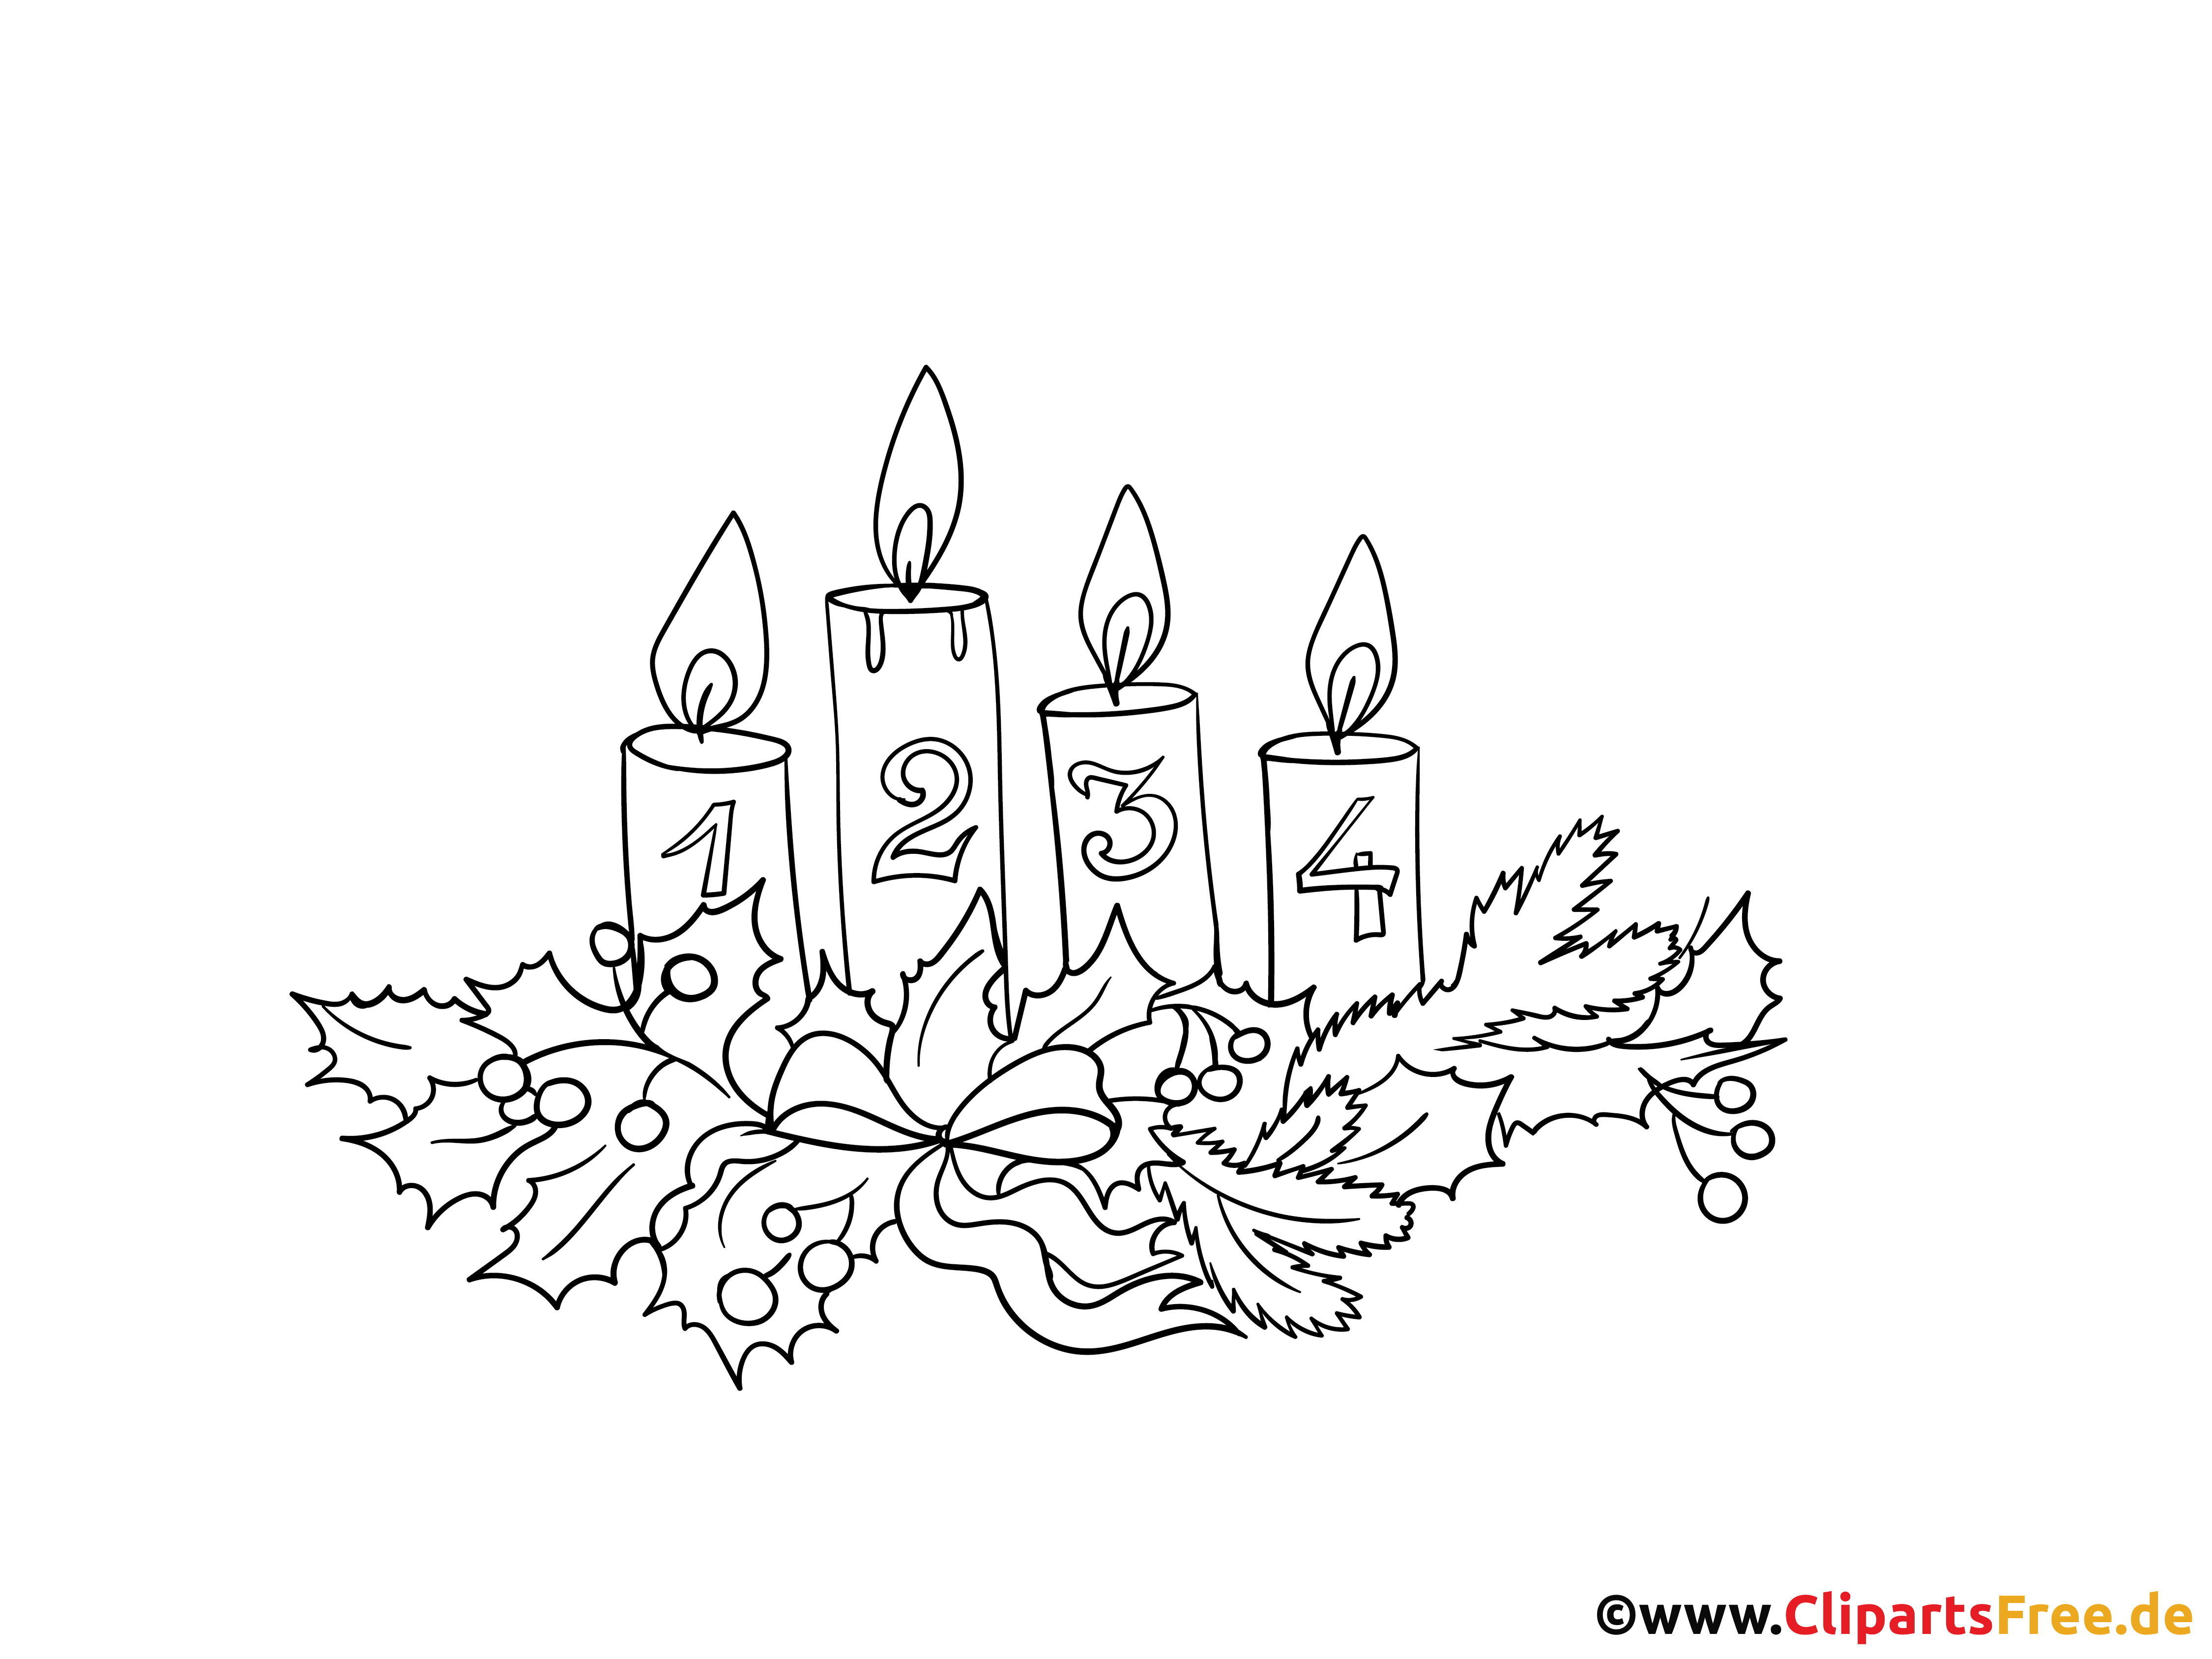 Clipart title: Free coloring page for Advent.